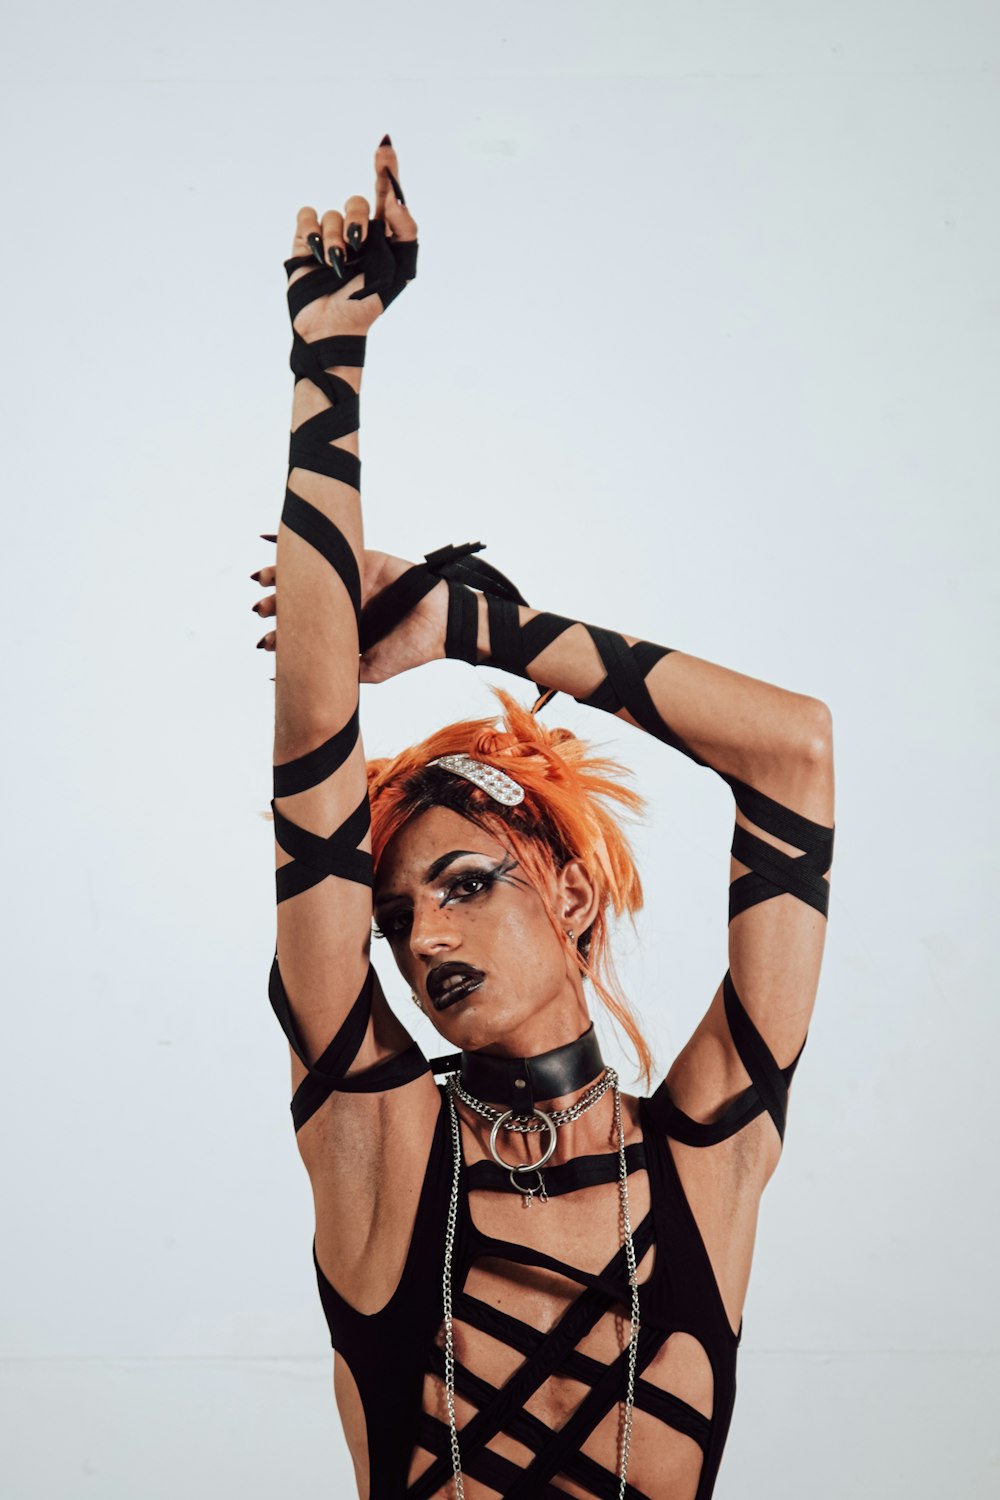 a woman with orange hair wearing a black outfit